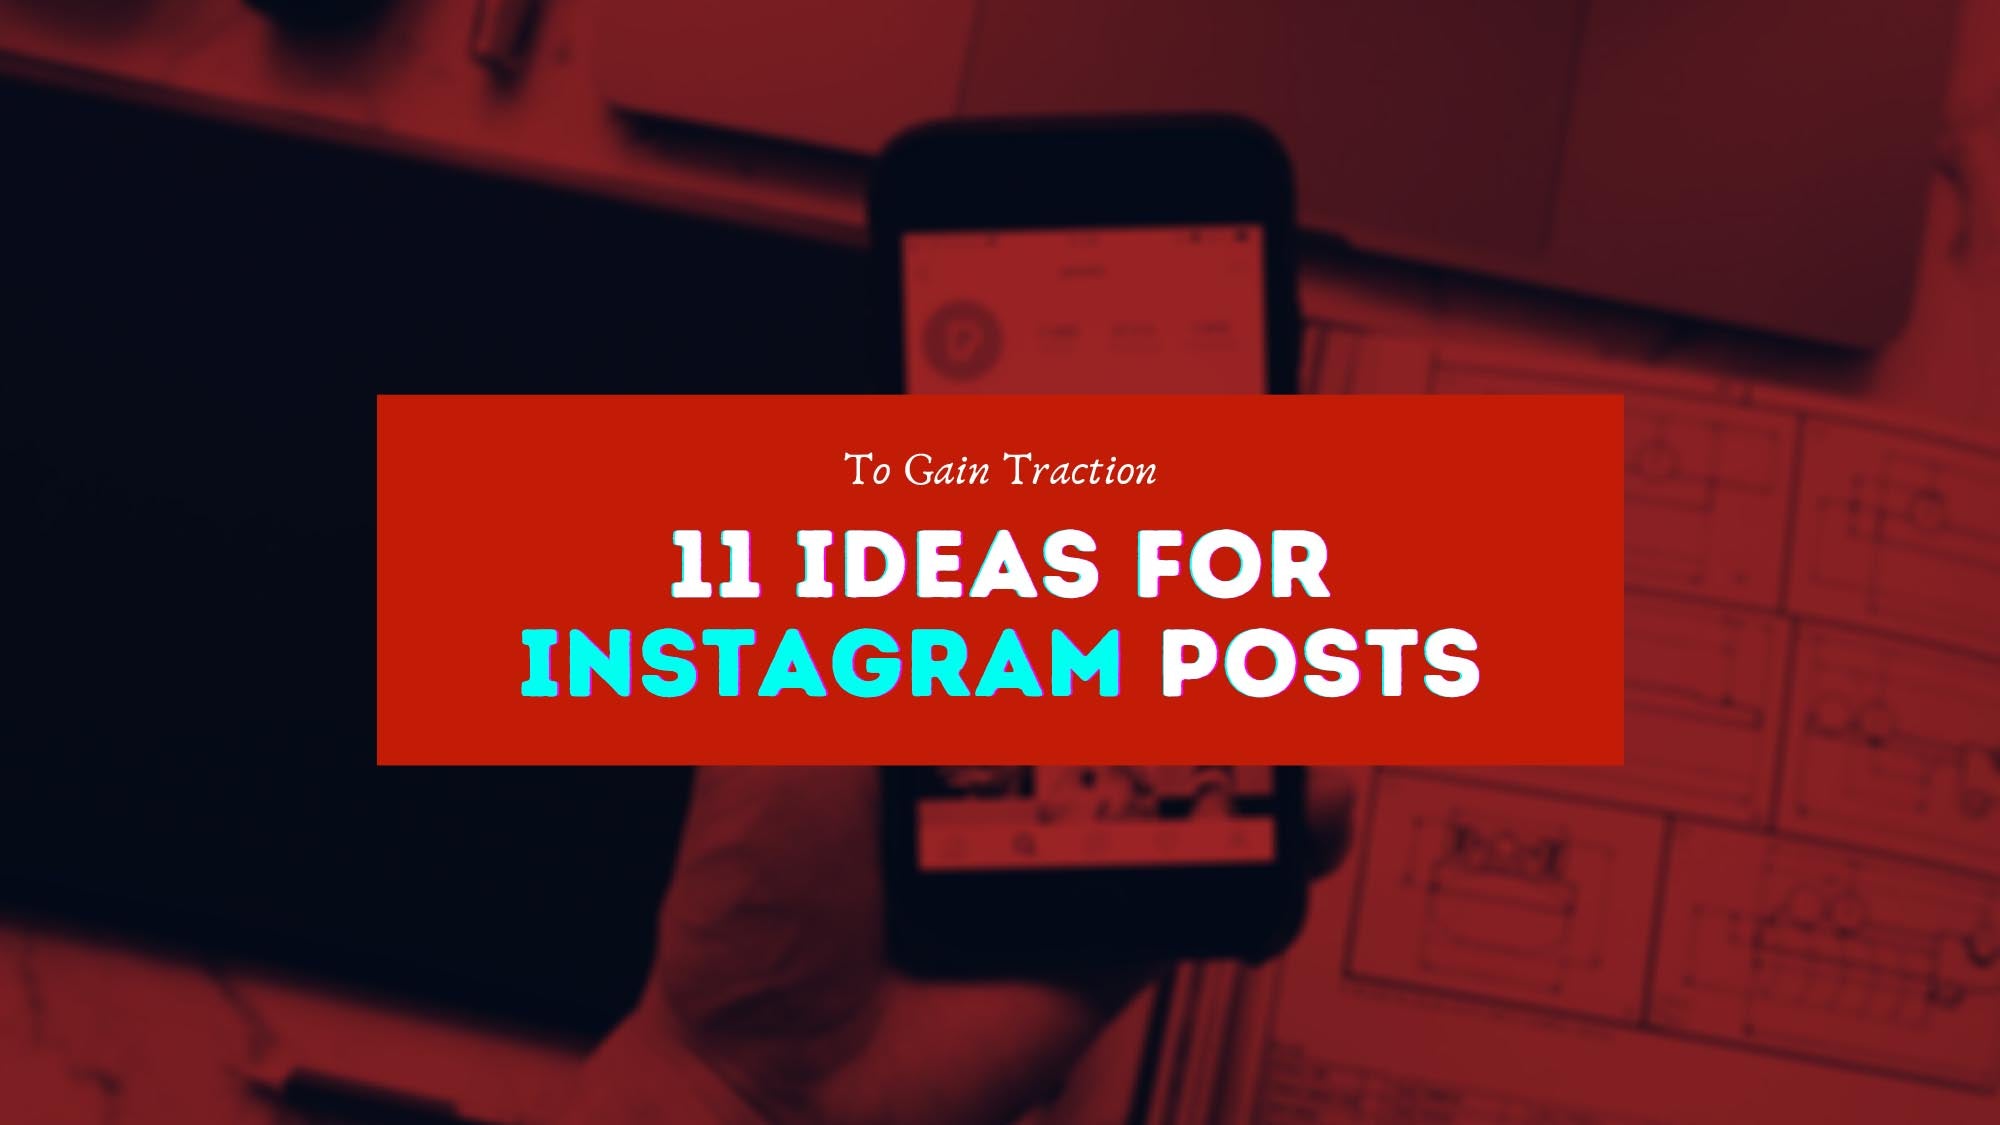 11 Ideas For Instagram Posts To Gain Traction